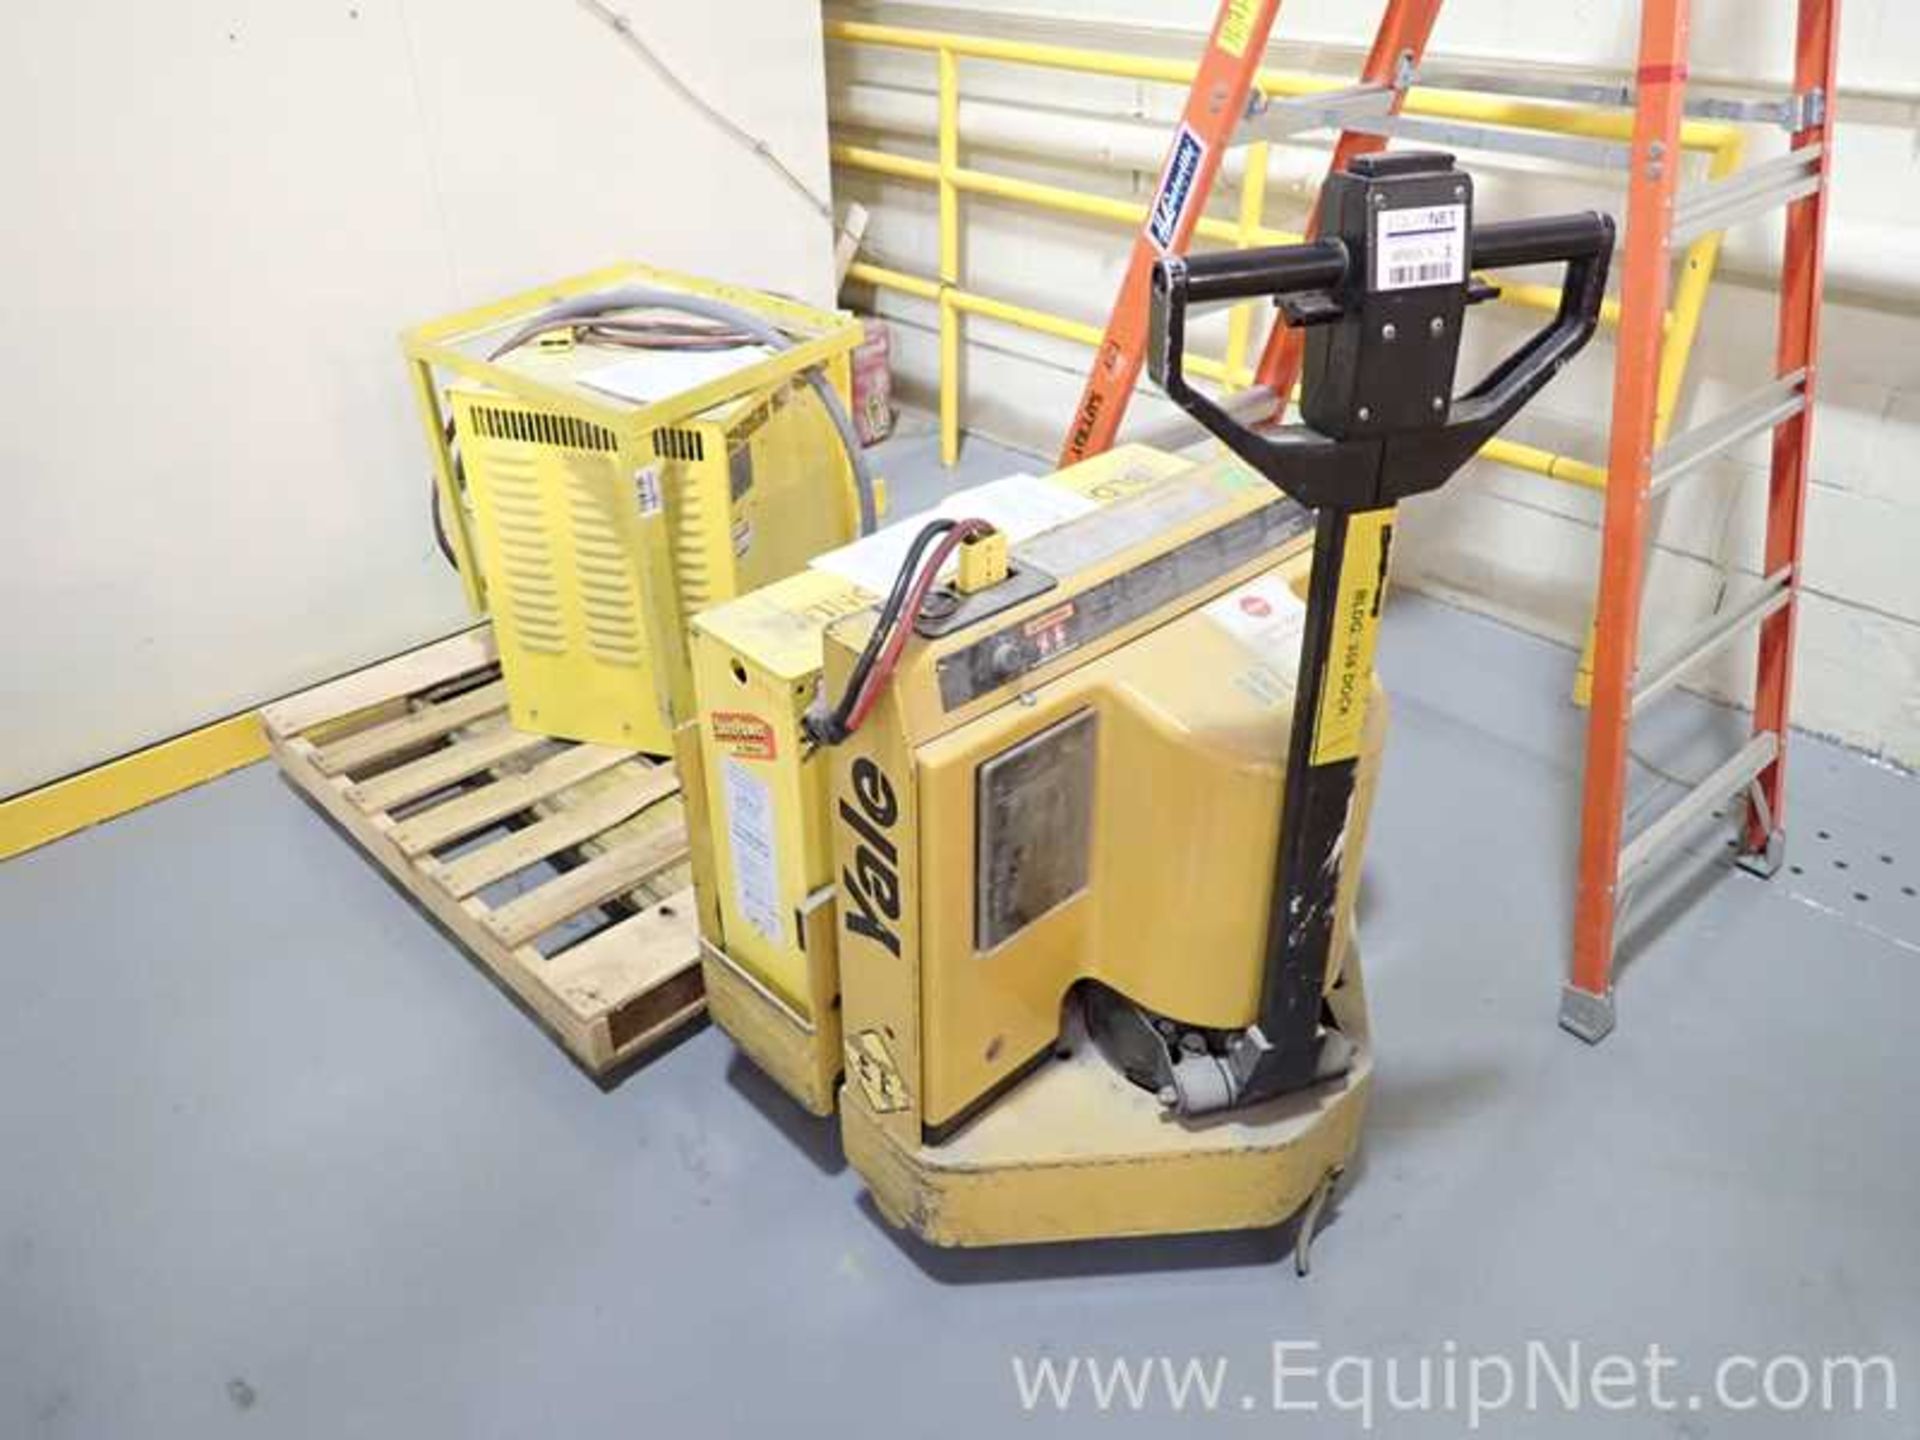 EQUIPNET LISTING #605035; REMOVAL COST: $50; MODEL: MPW060SCN12T2748EE; DESCRIPTION: Yale